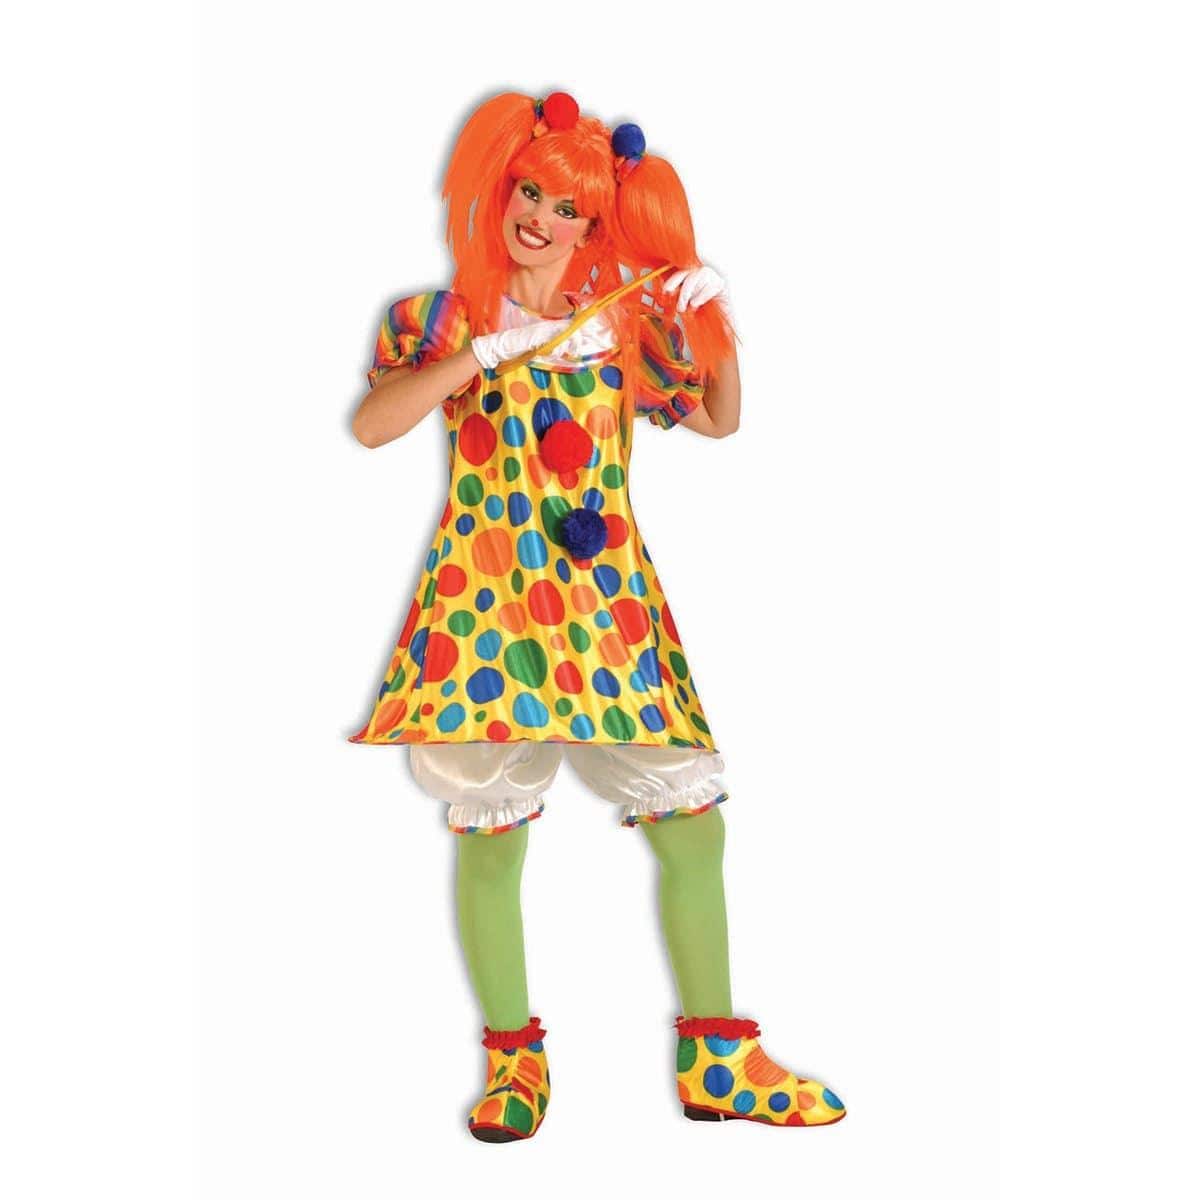 Buy Costumes Giggles the Clown Costume for Adults sold at Party Expert